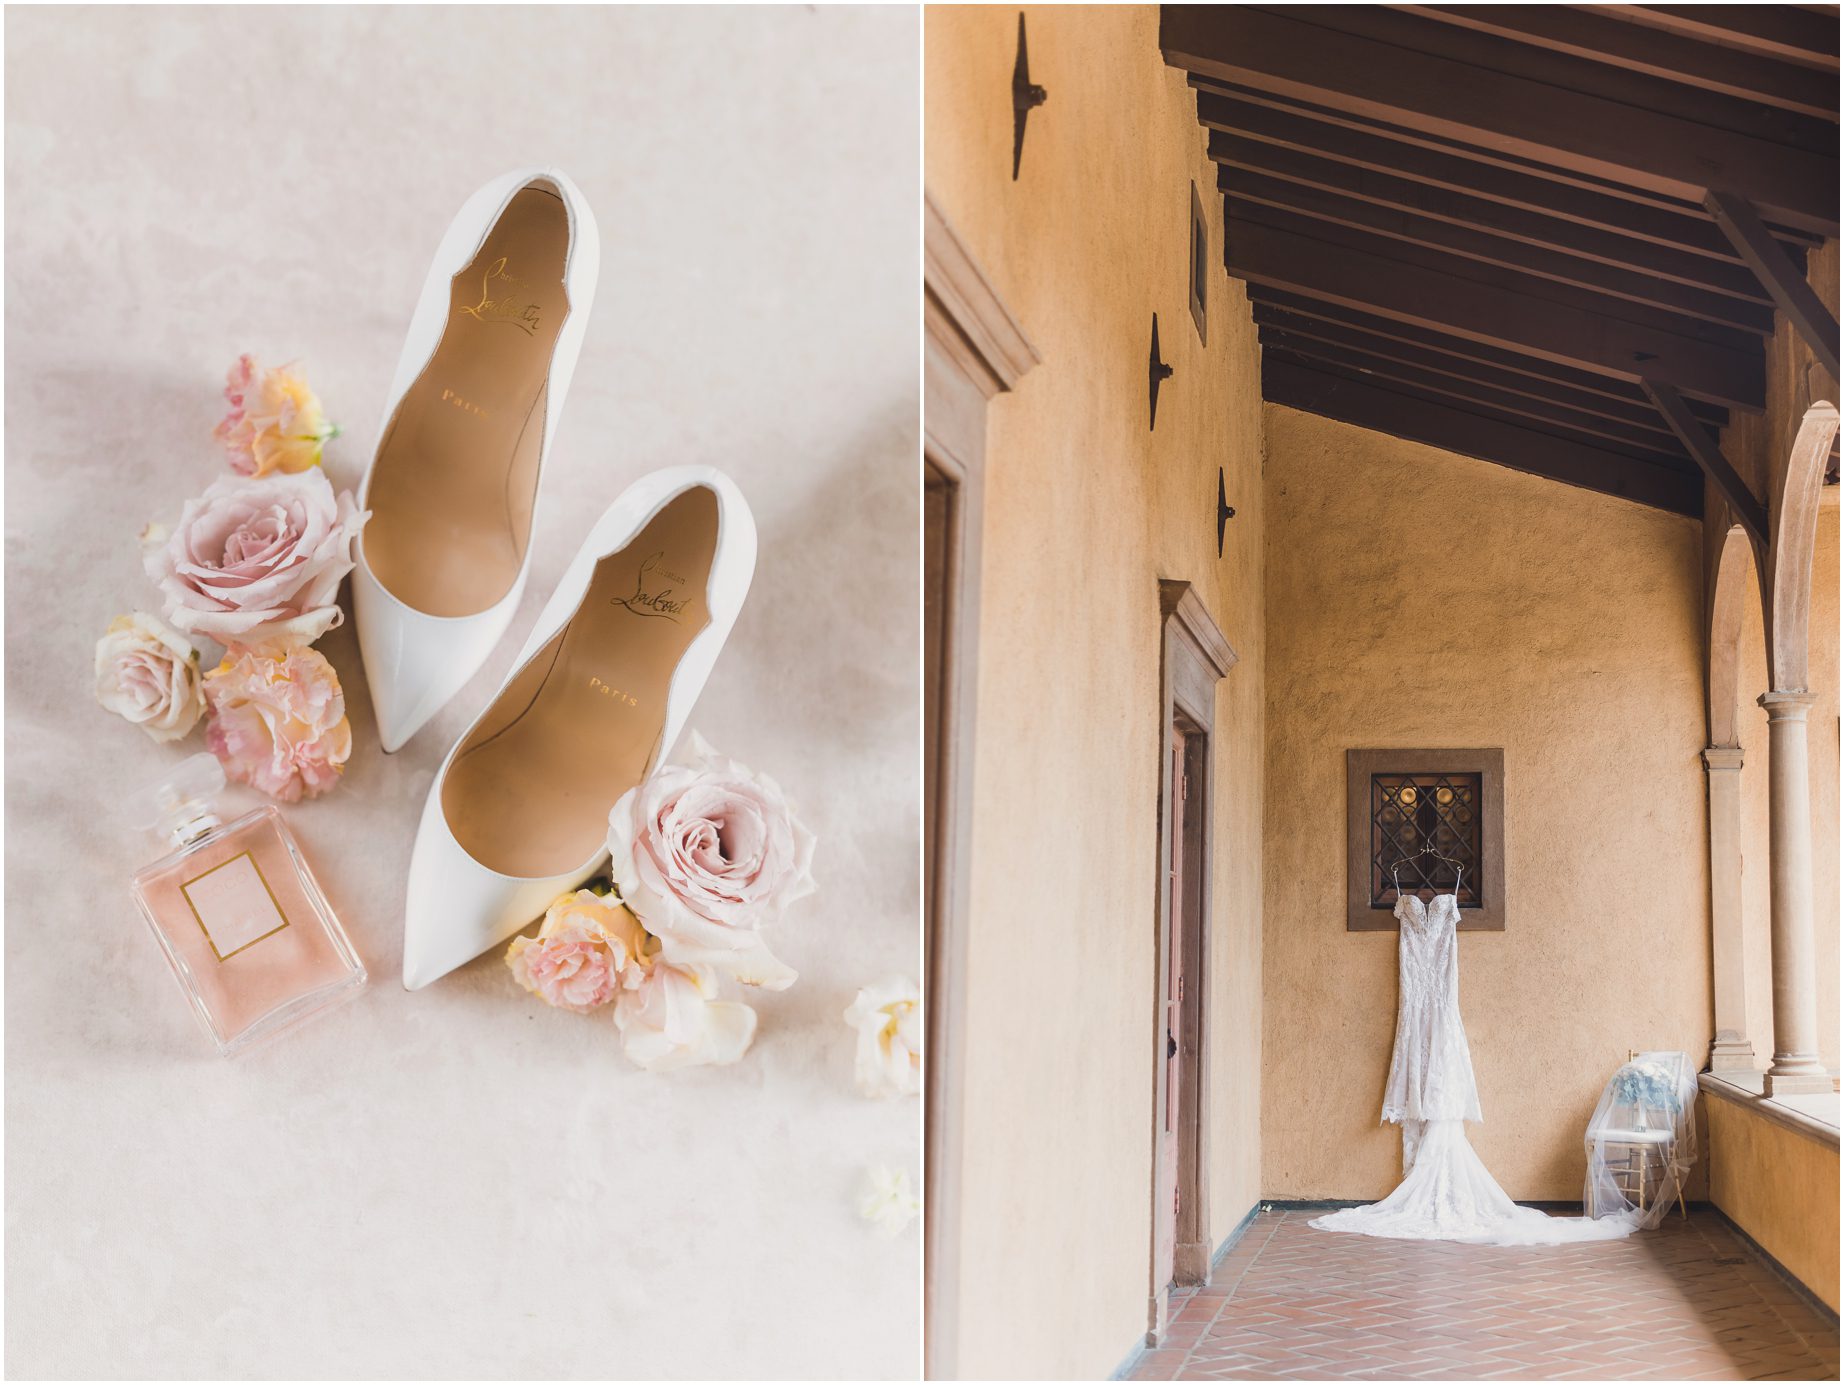 White wedding shoes and pink flowers with perfume, styled by sun and sparrow photography for a wedding at Villa del sol d'Oro. On the right a wedding dress hangs before the wedding